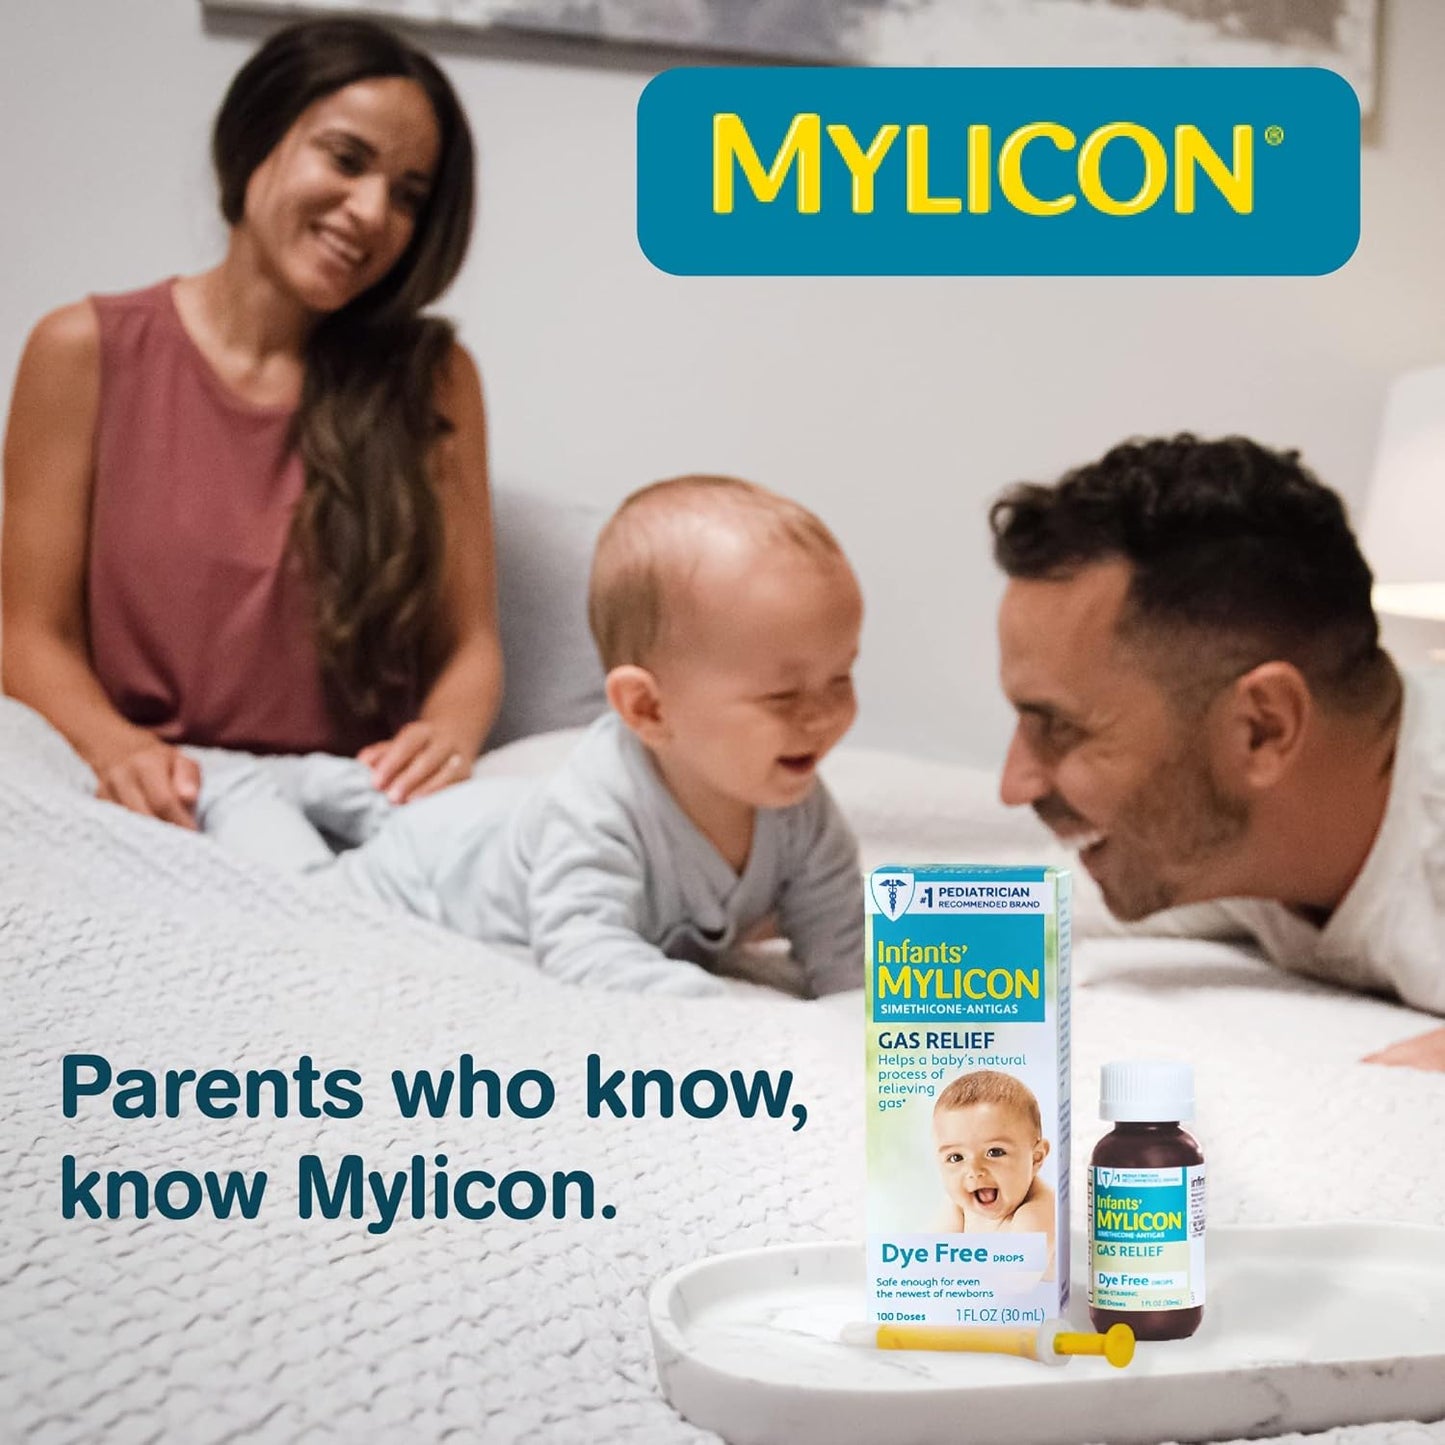 MYLICON Infants Gas Relief Drops for Infants and Babies, Dye Free Formula, 1 Fluid Ounce